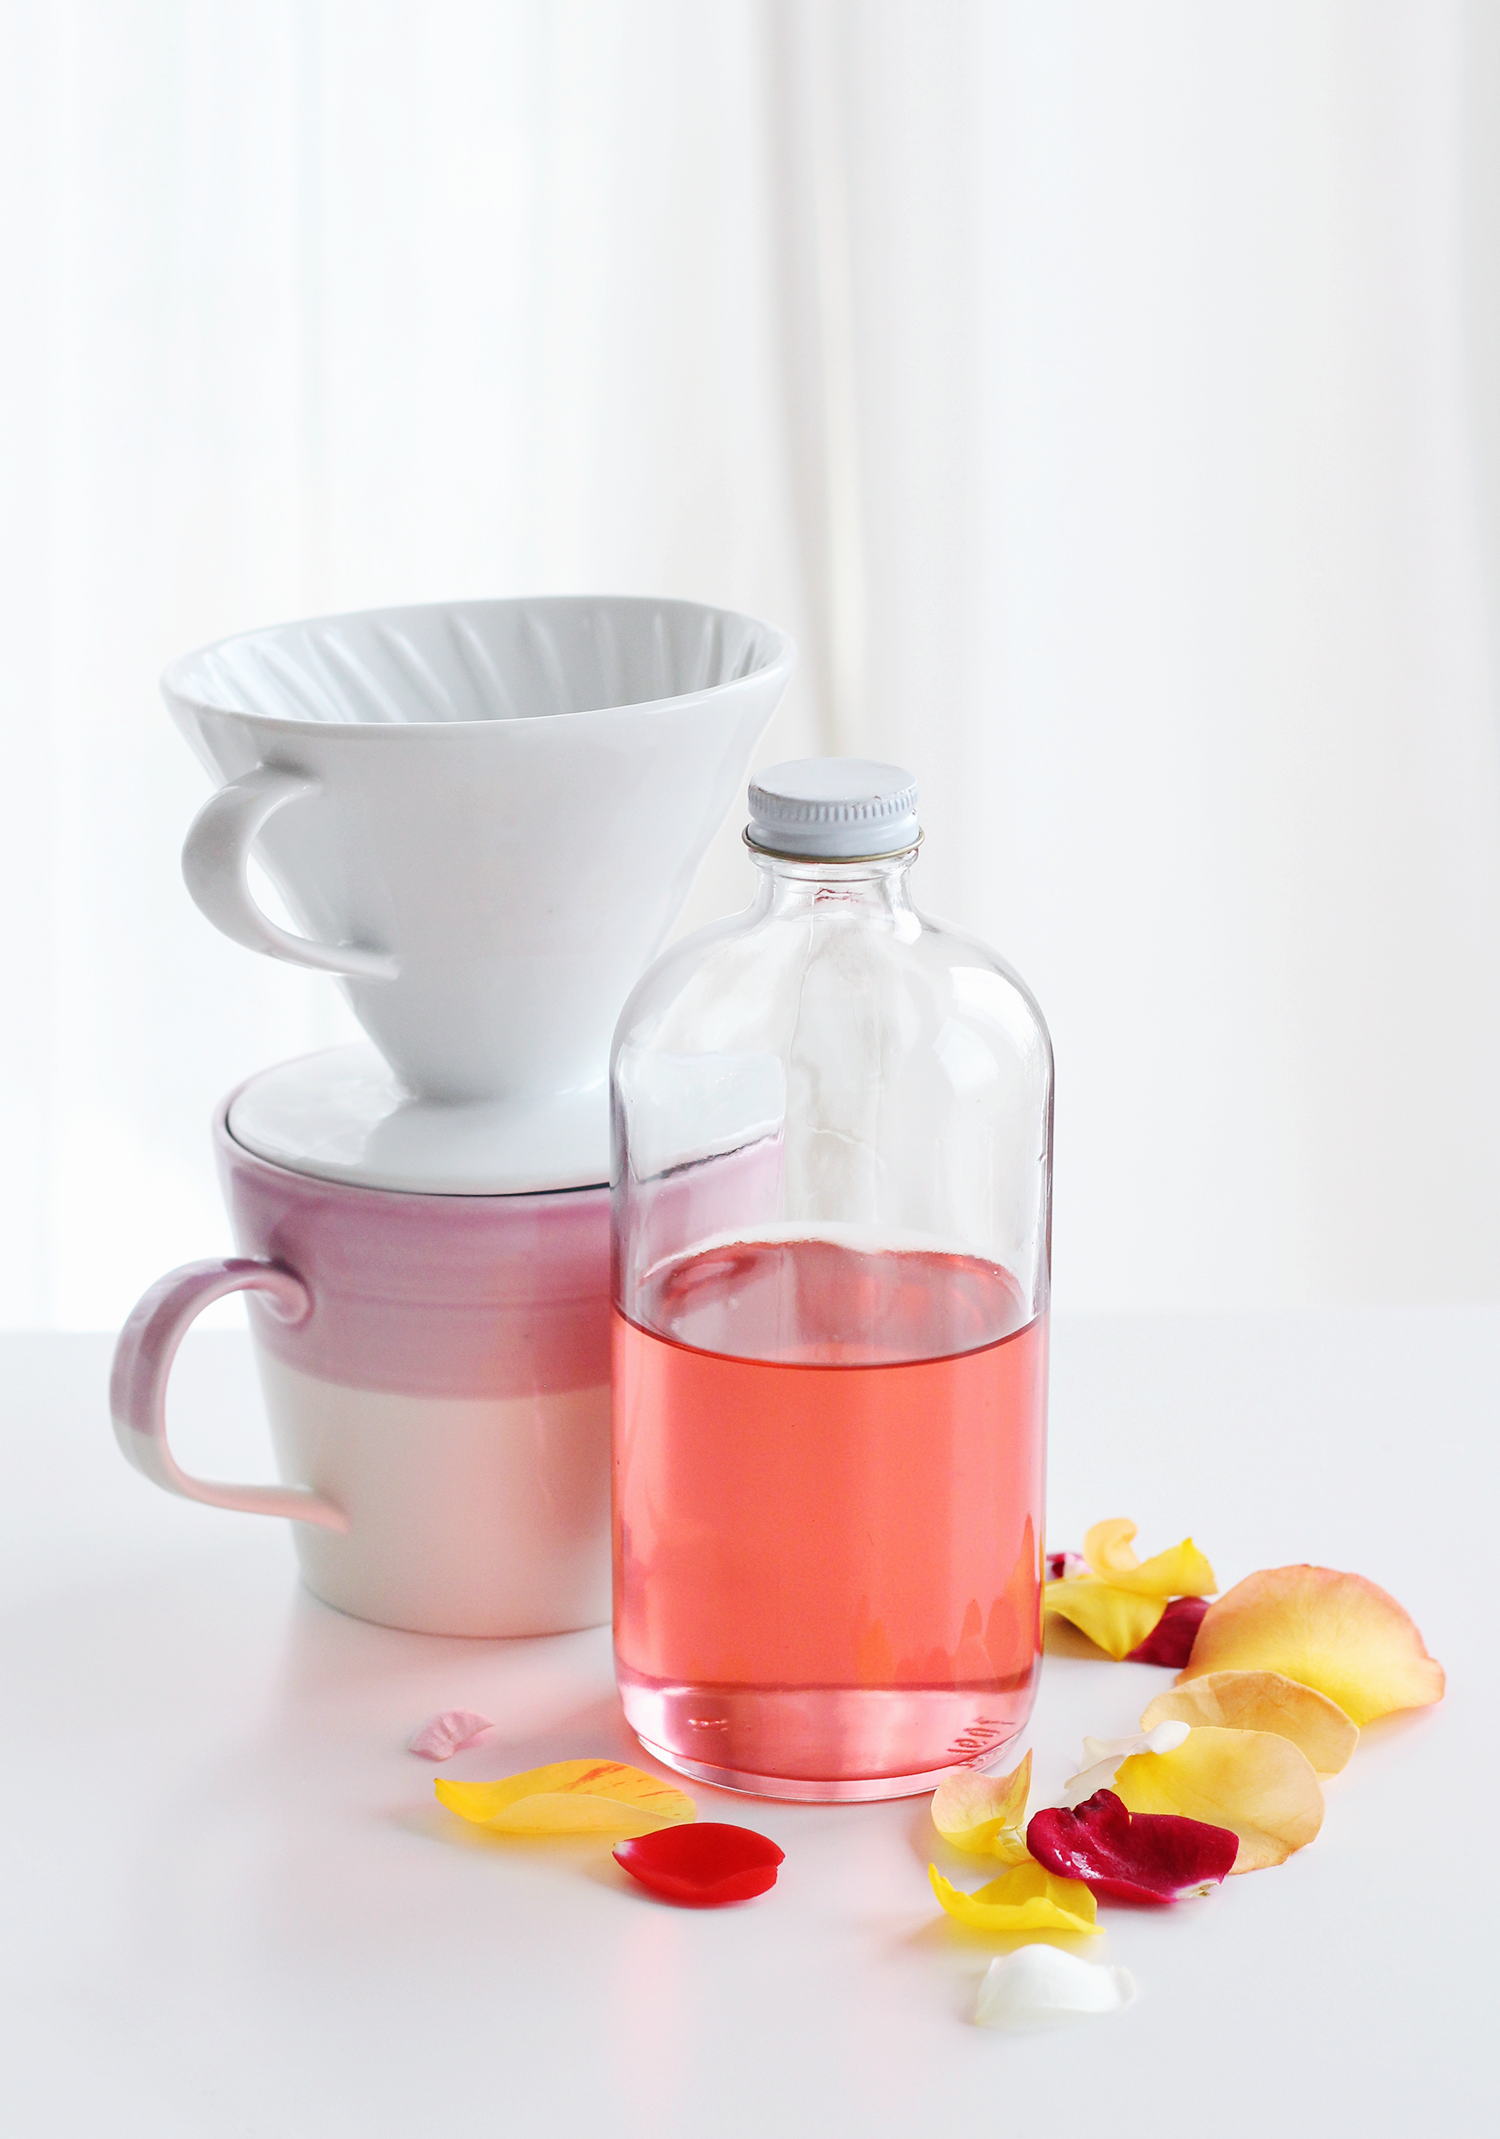 Homemade Rose Simple Syrup is easy to make and it looks pretty too